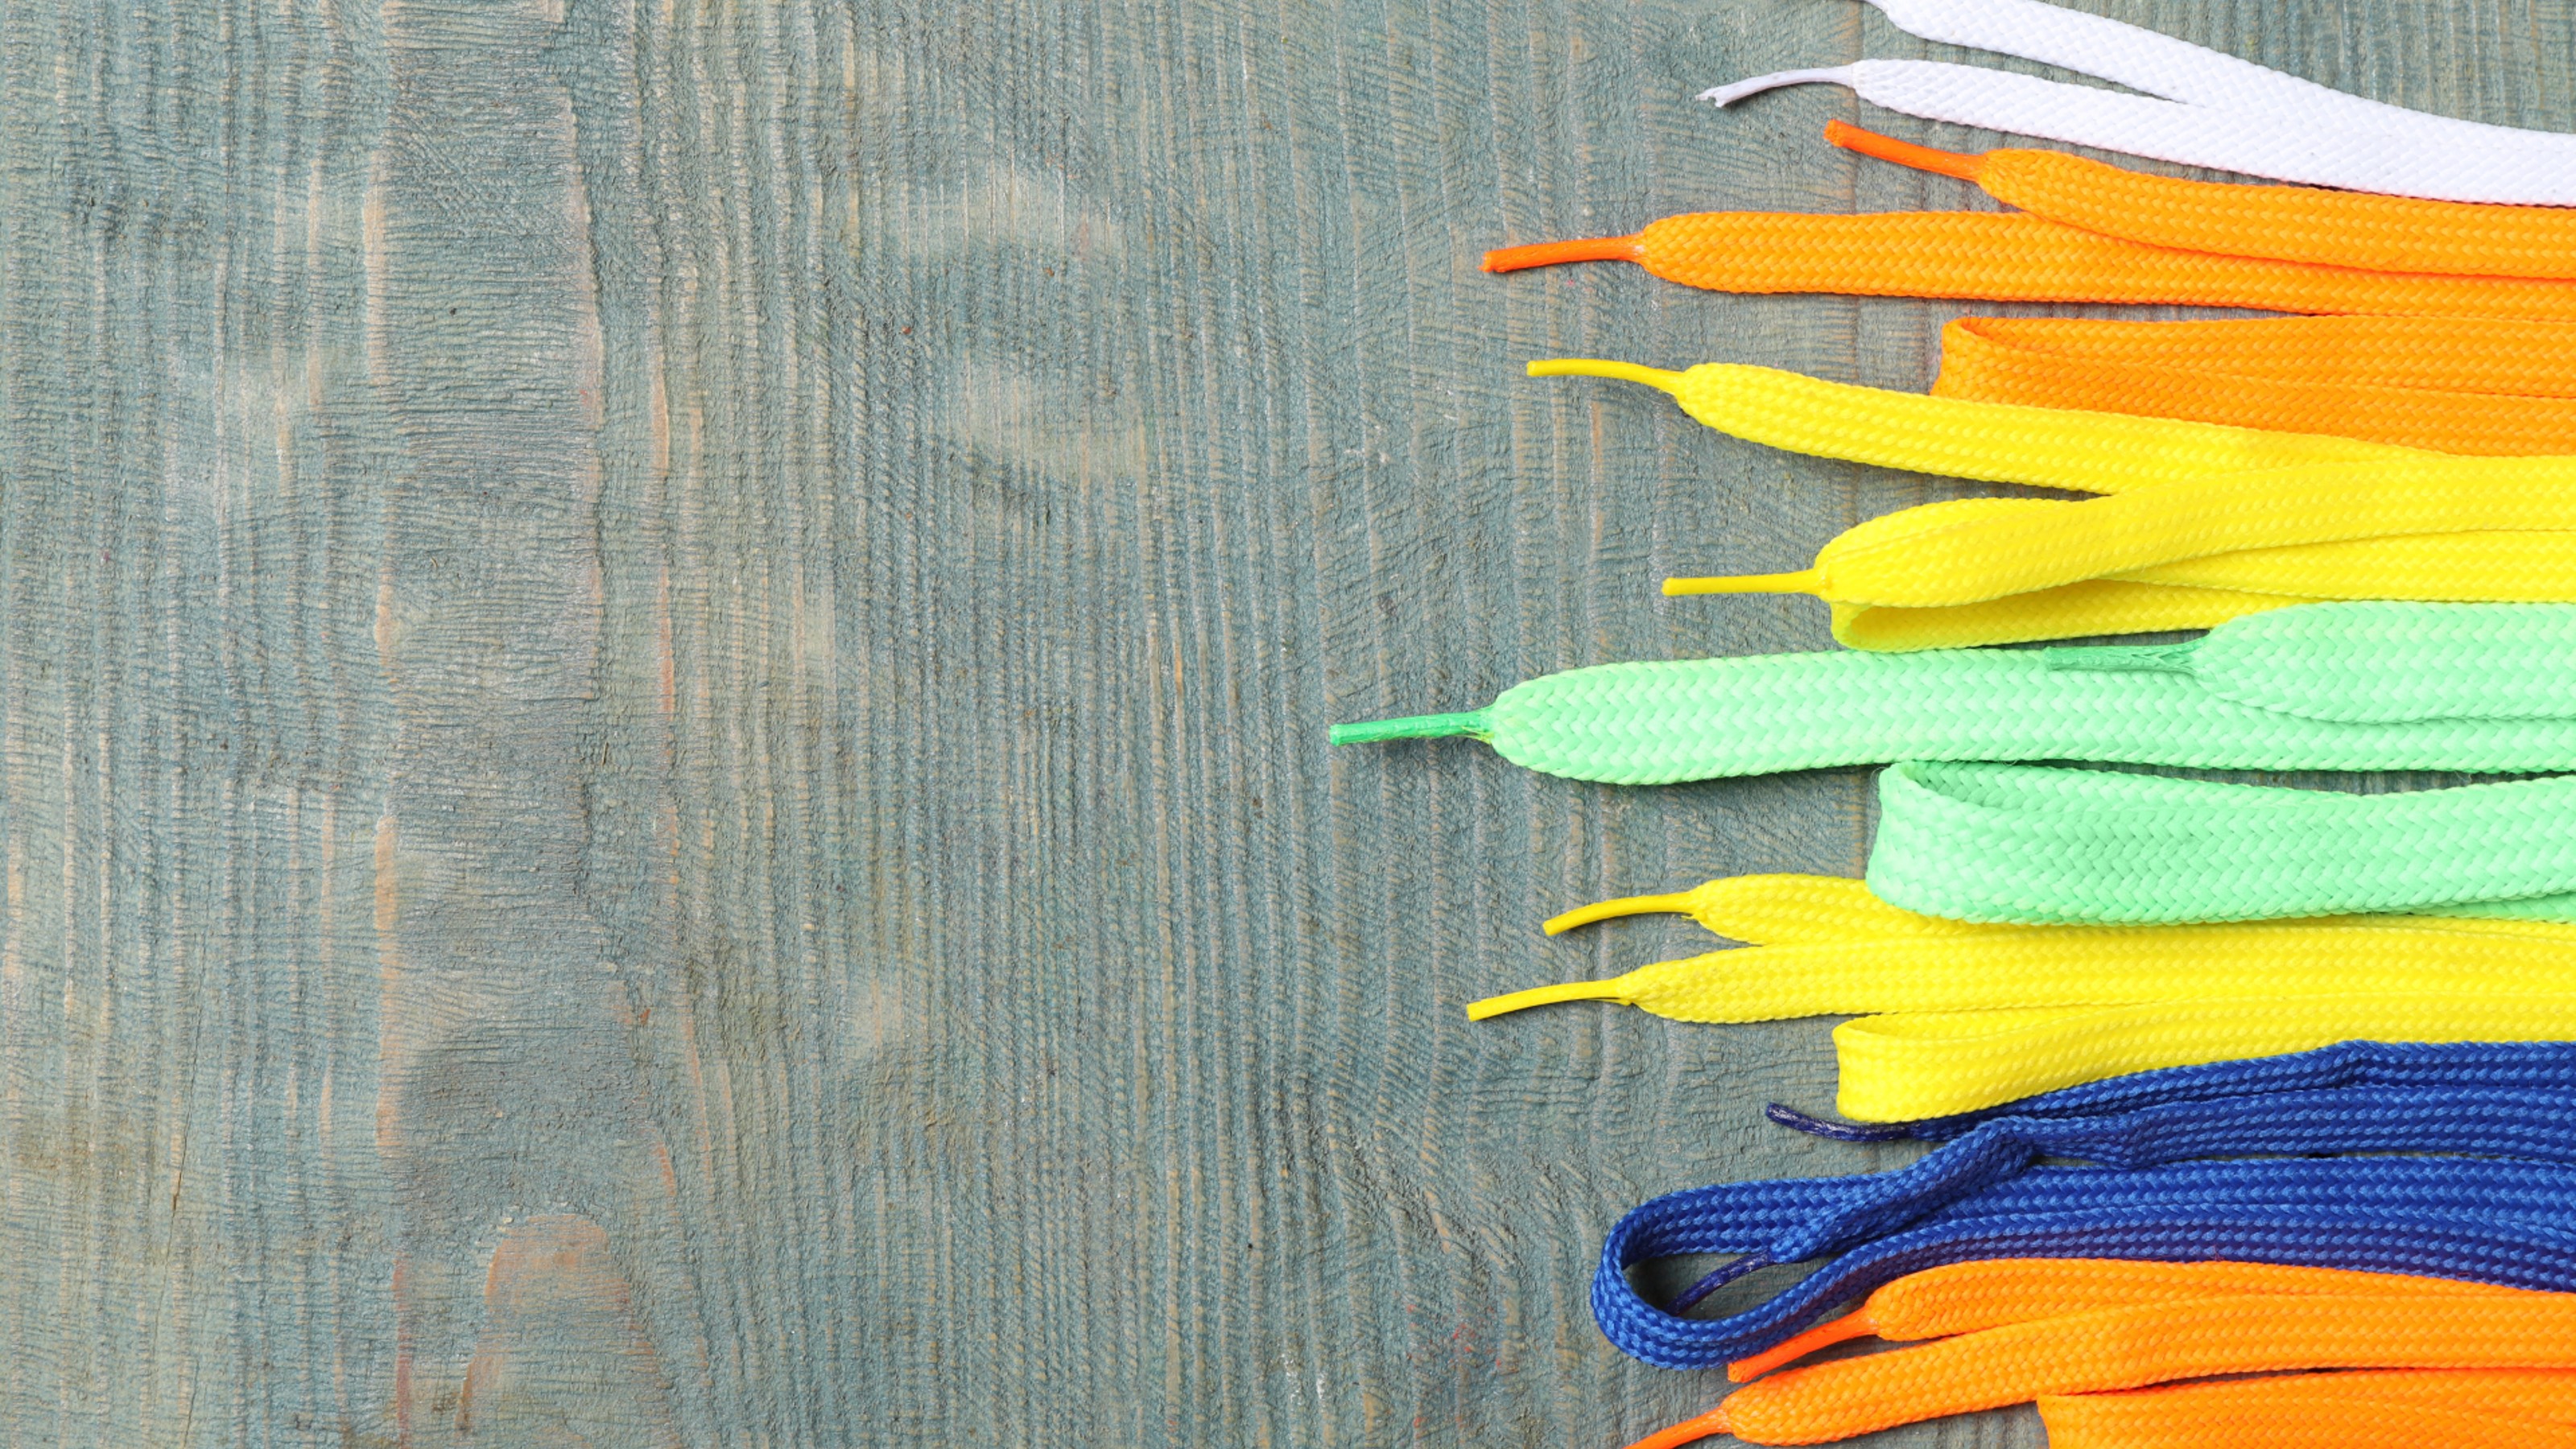 Multicolored shoelaces in varying shades of yellow, green, blue, and orange are arranged neatly on the right side of a wooden surface. The left side of the surface is empty.